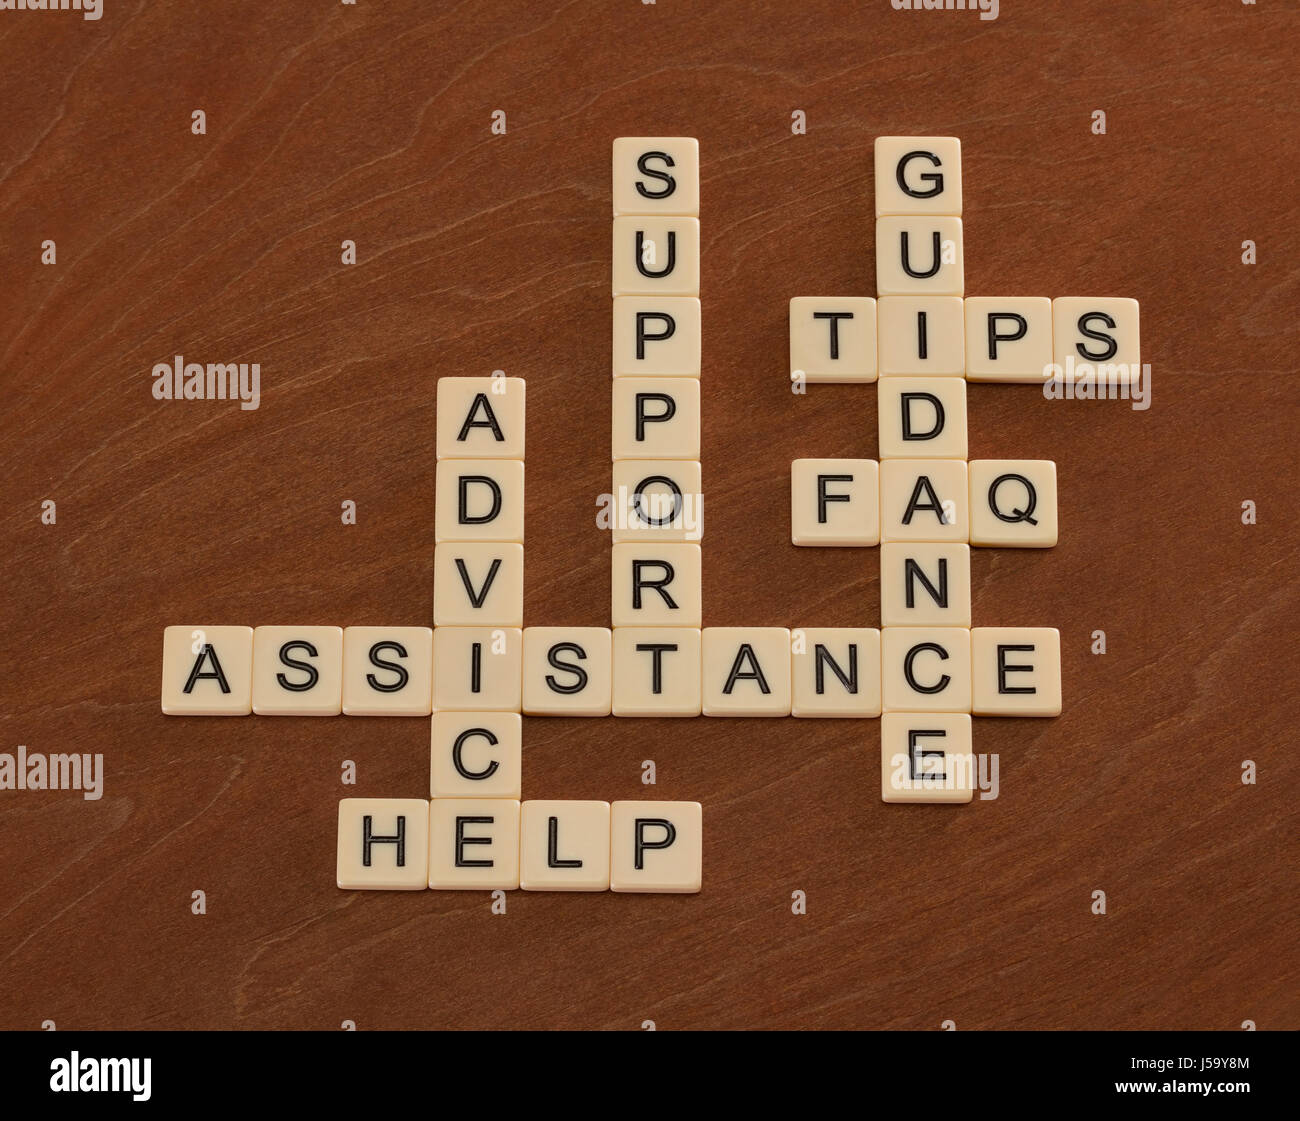 Crossword puzzle with words Support, Help, FAQ, Assistance. Customer care concept. Ivory tiles with capital letters on mahogany board. Stock Photo